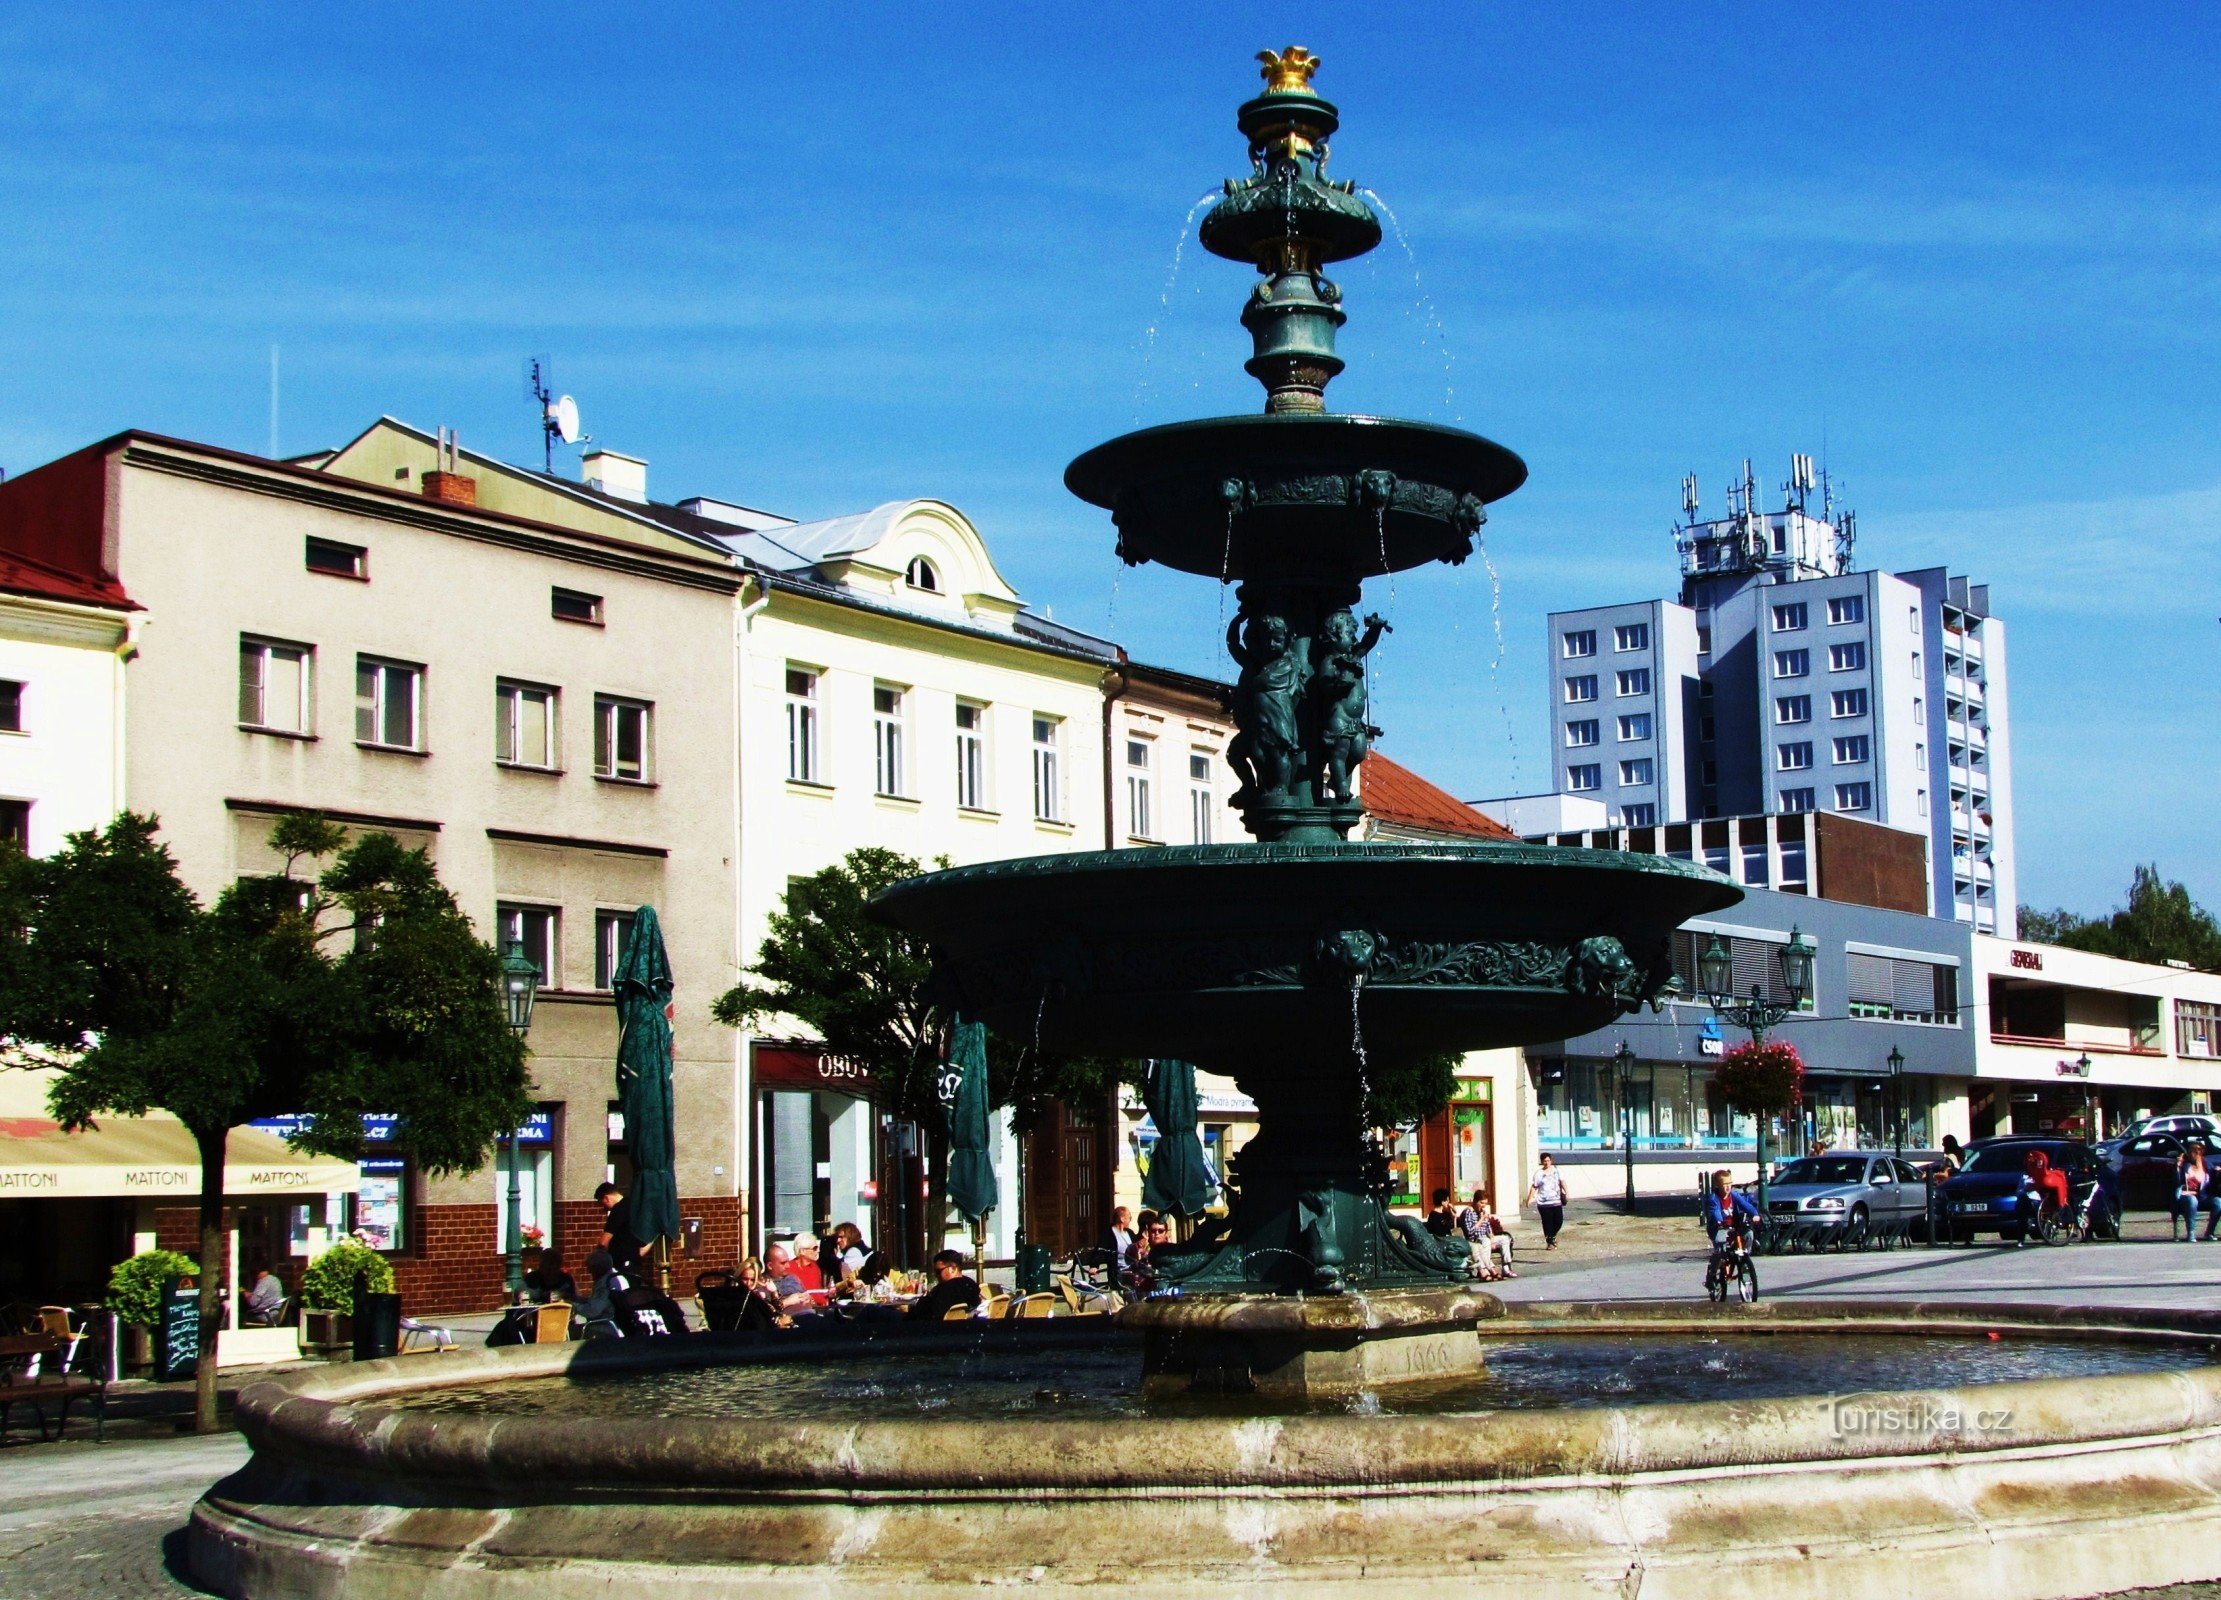 The fountain on Masaryk Square in Karviná